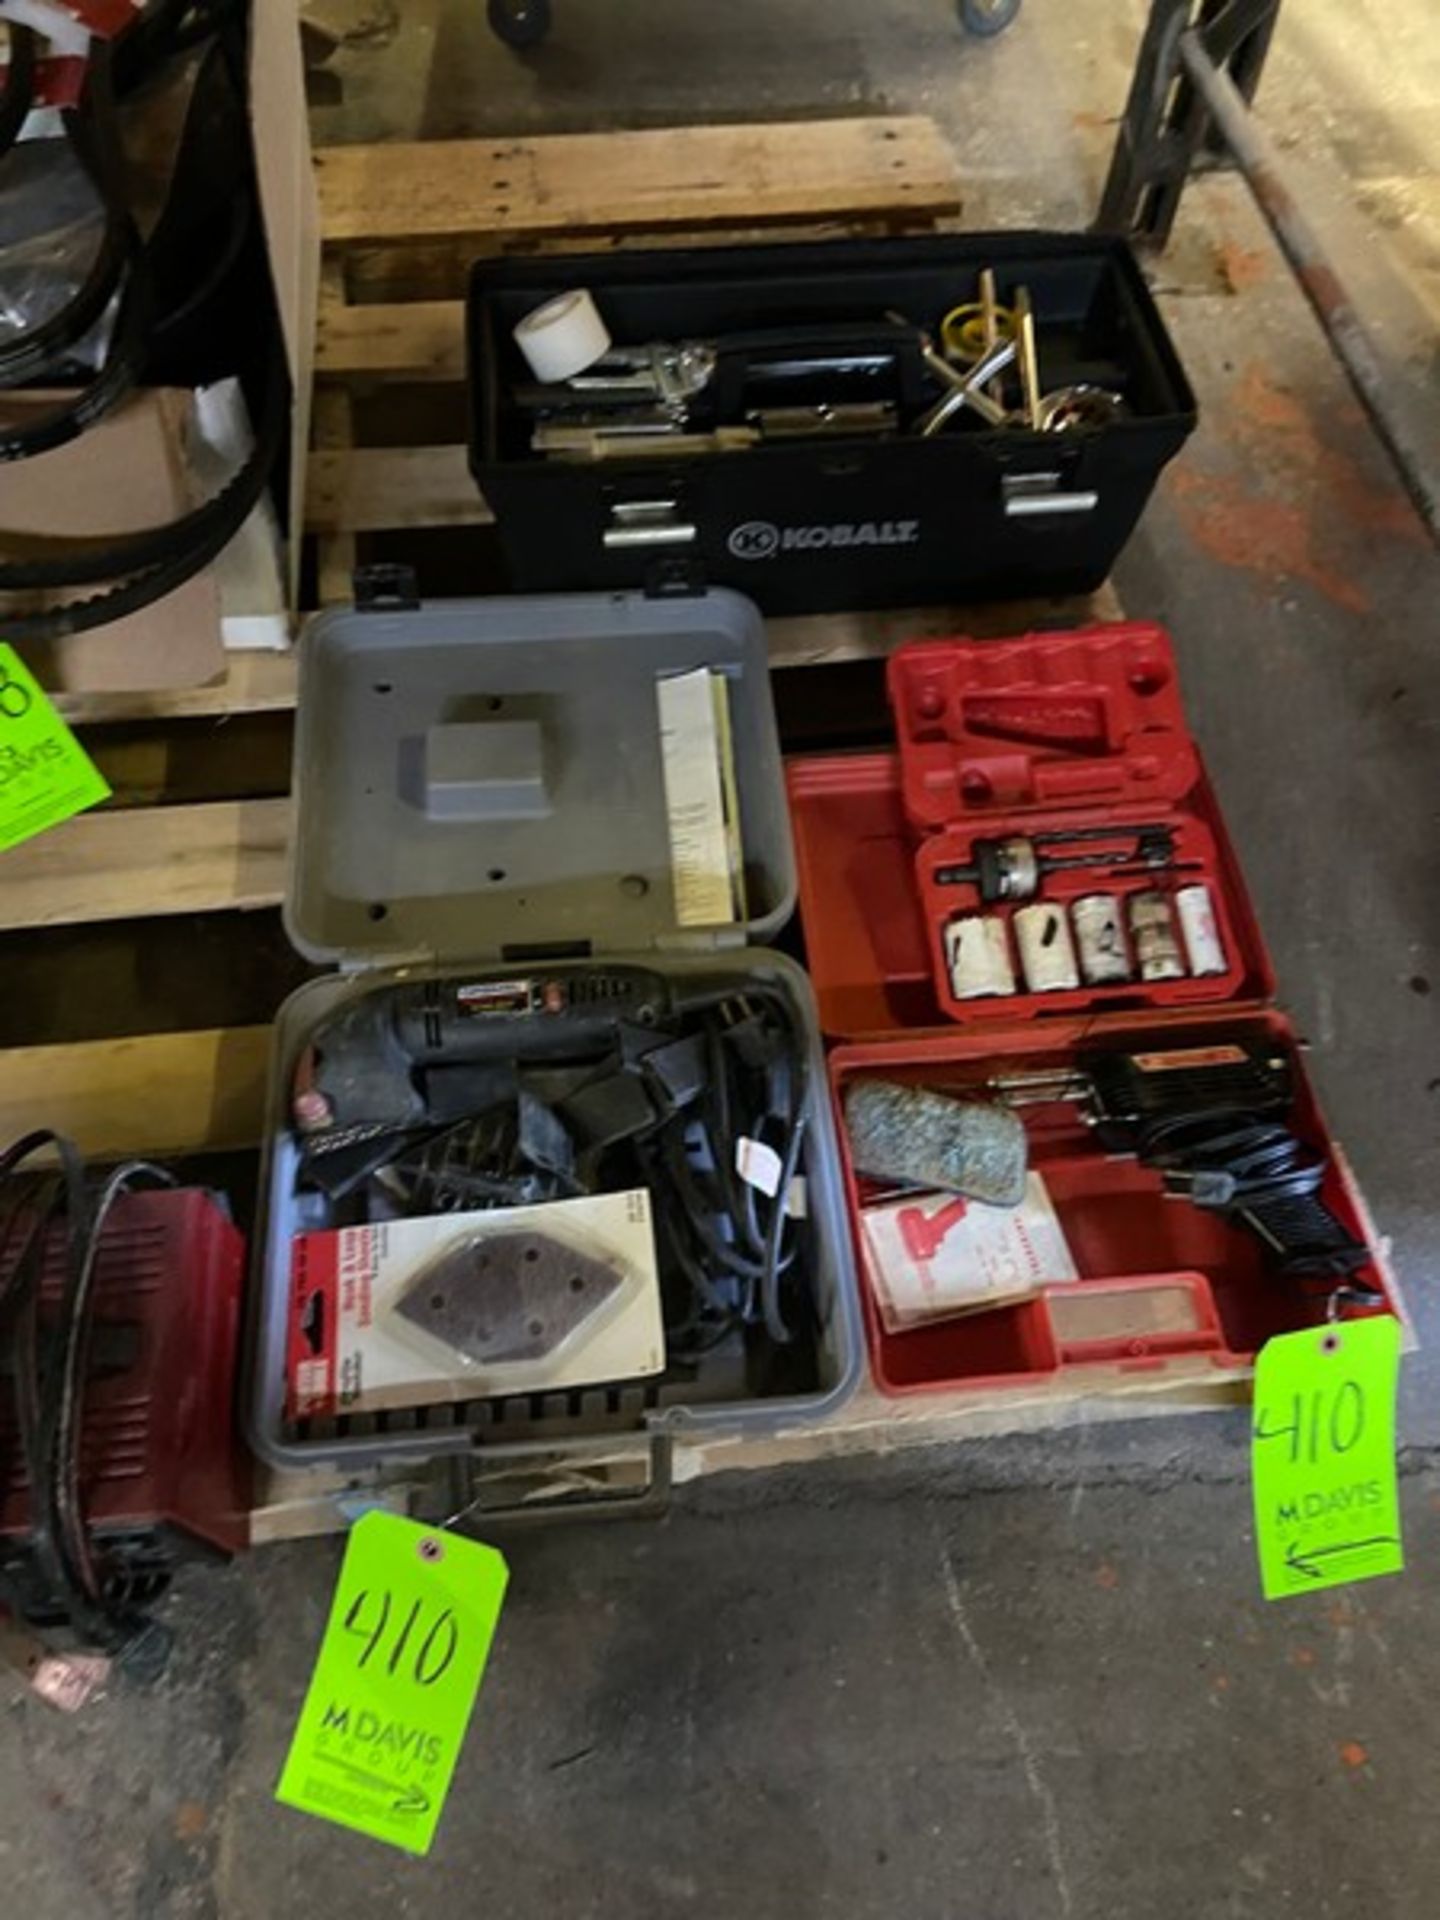 PALLET WITH CIRCULAR DRILL BITS IN HARD CASE, KOBALT TOOL BOX, GLUE GUN, & GRINDER (LOCATED IN CALLE